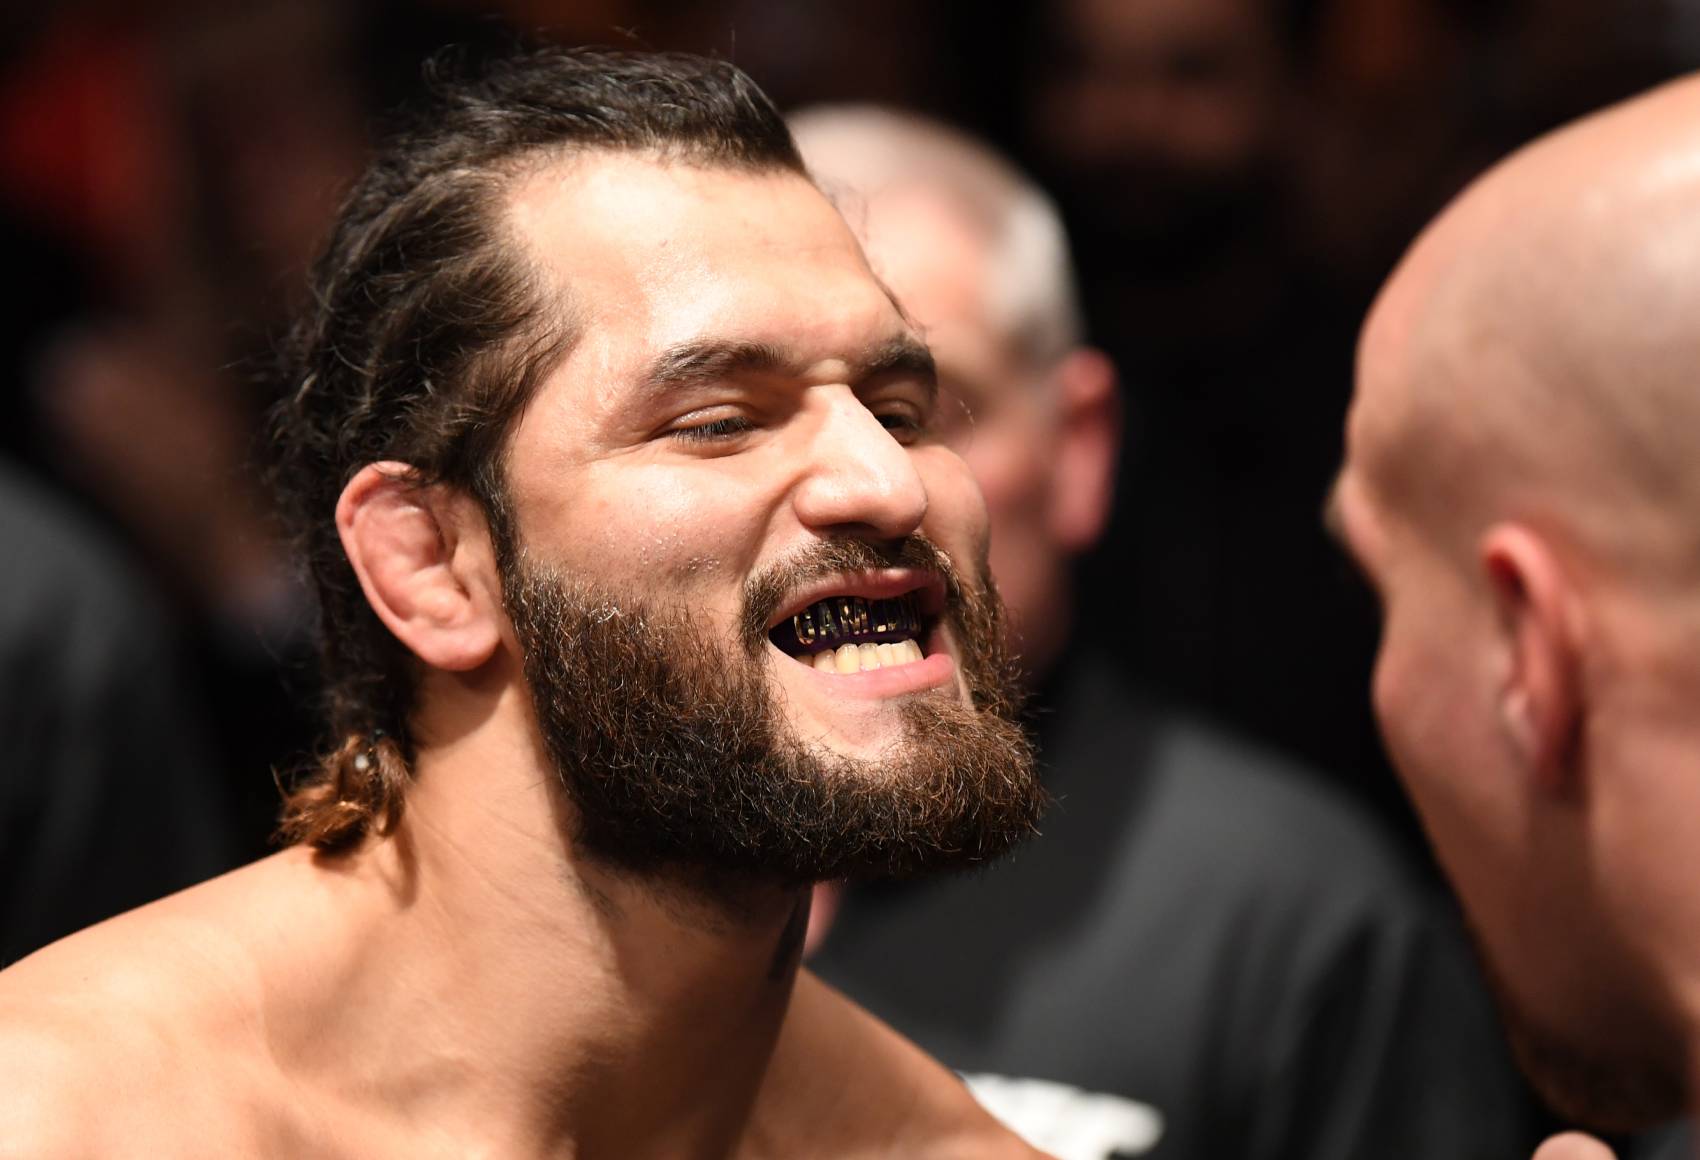 UFC fighter Jorge Masvidal negotiated his UFC 251 contract at a barbecue. 